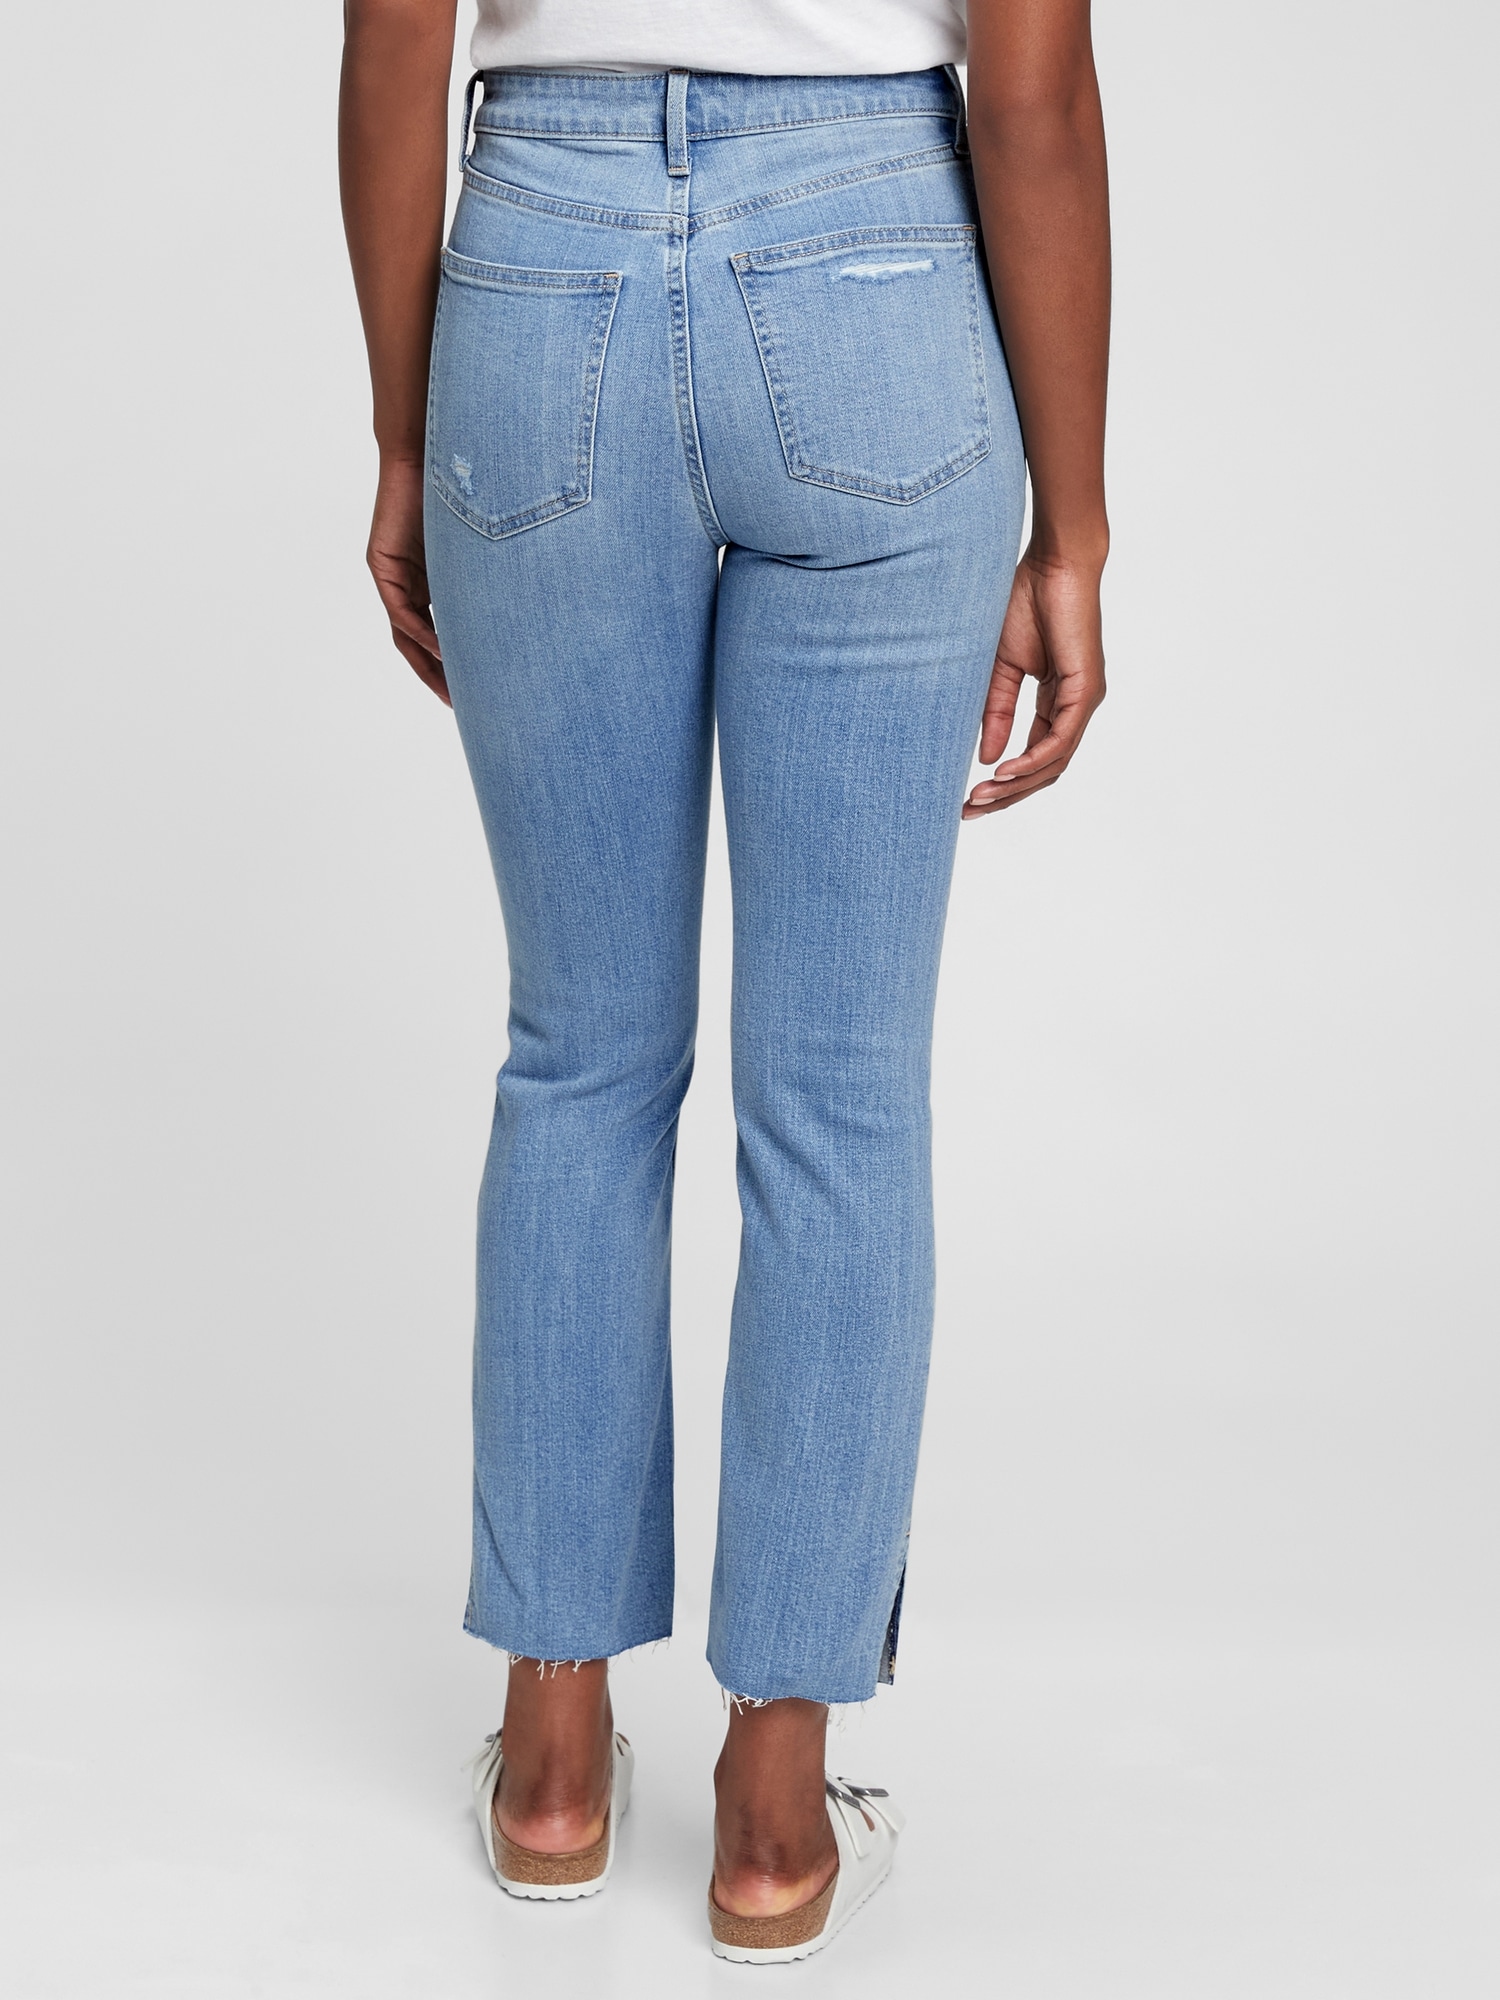 America receive Father fage Sky High Rise Vintage Slim Jeans with Washwell | Gap